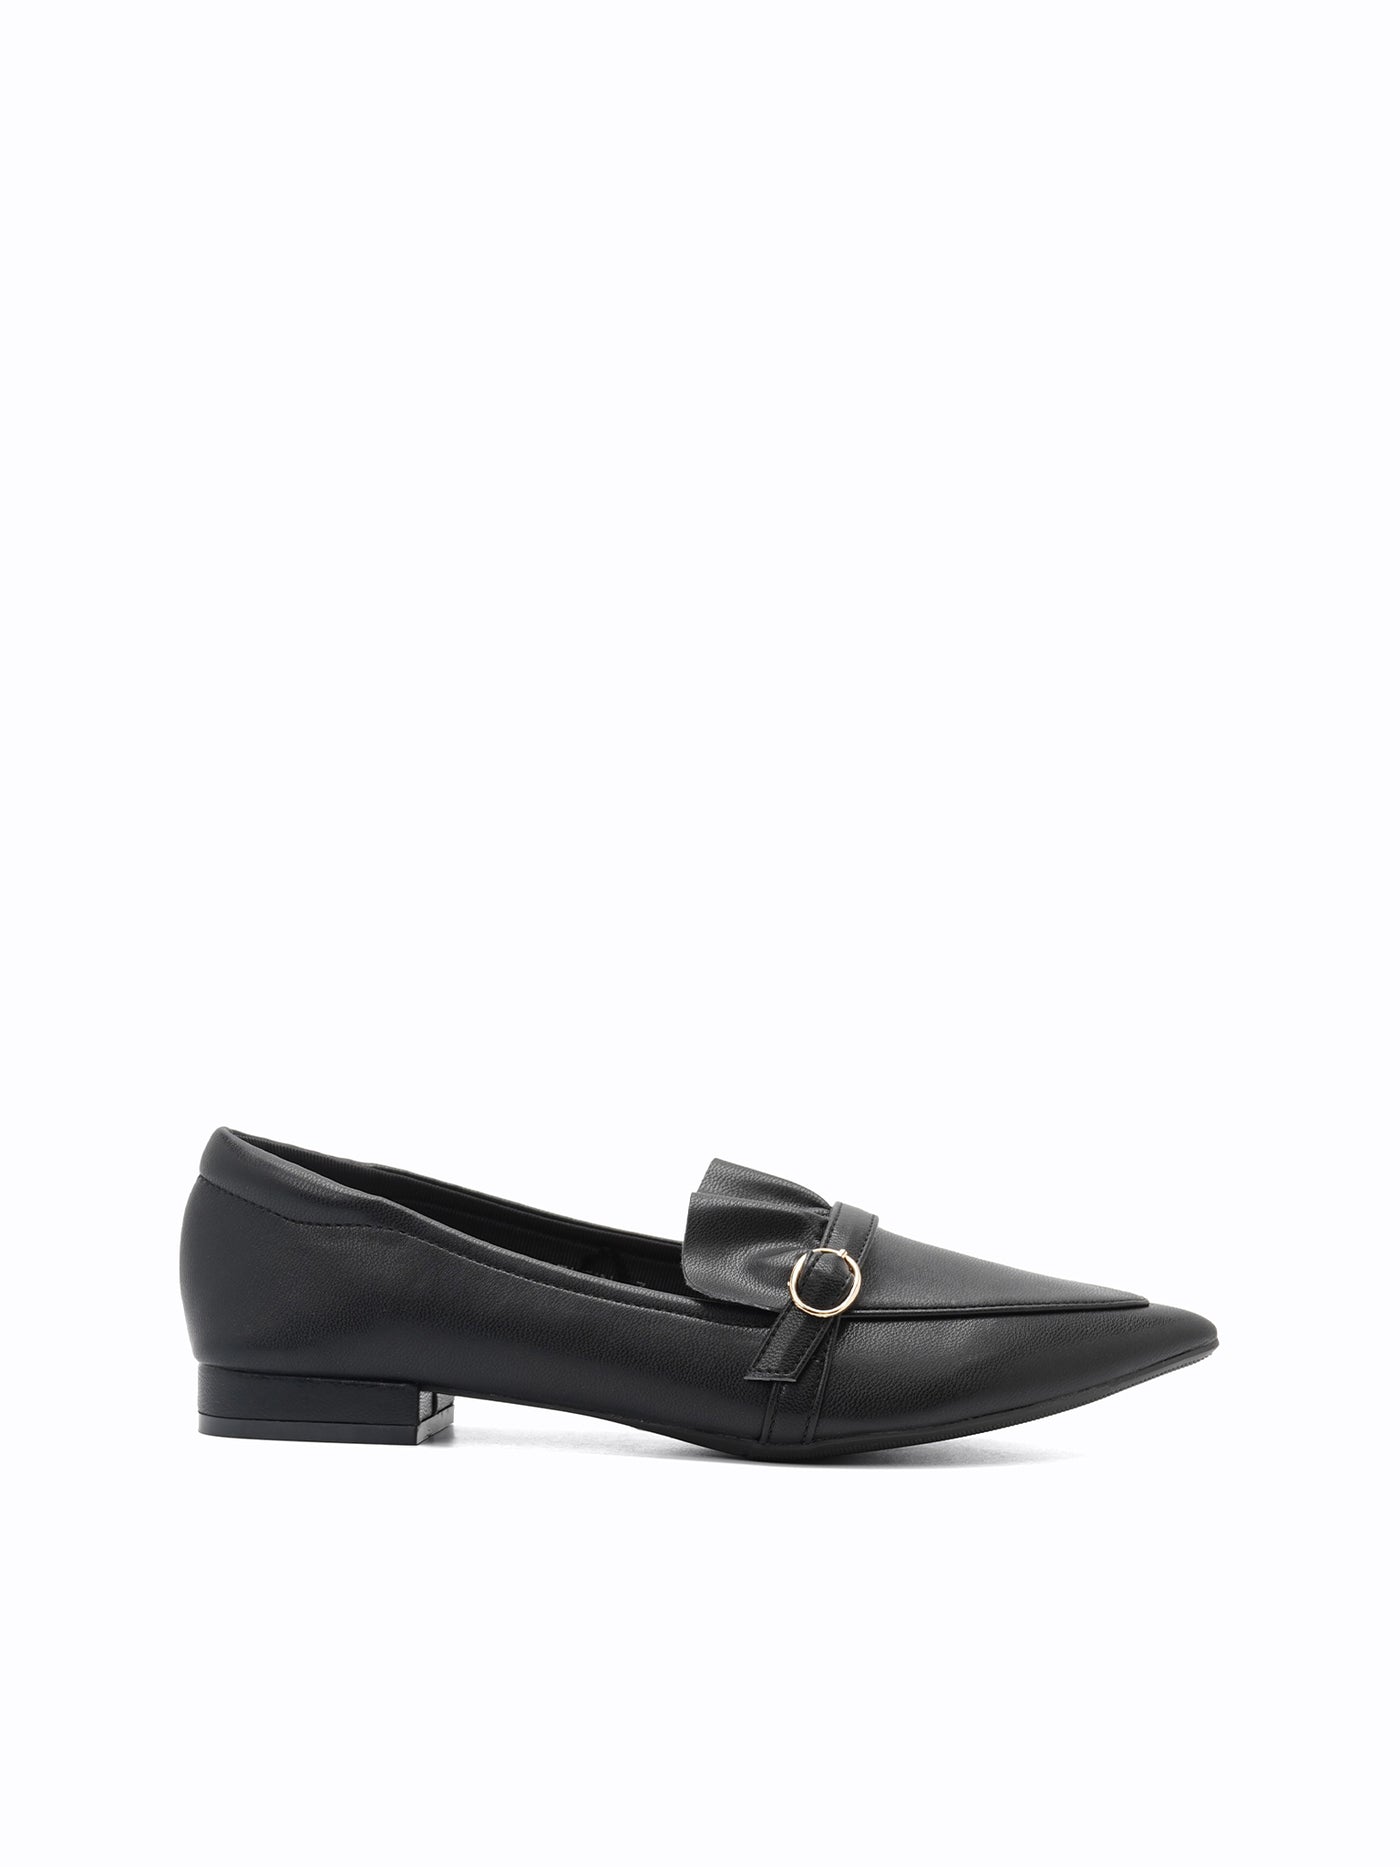 Delfin Flat Loafers